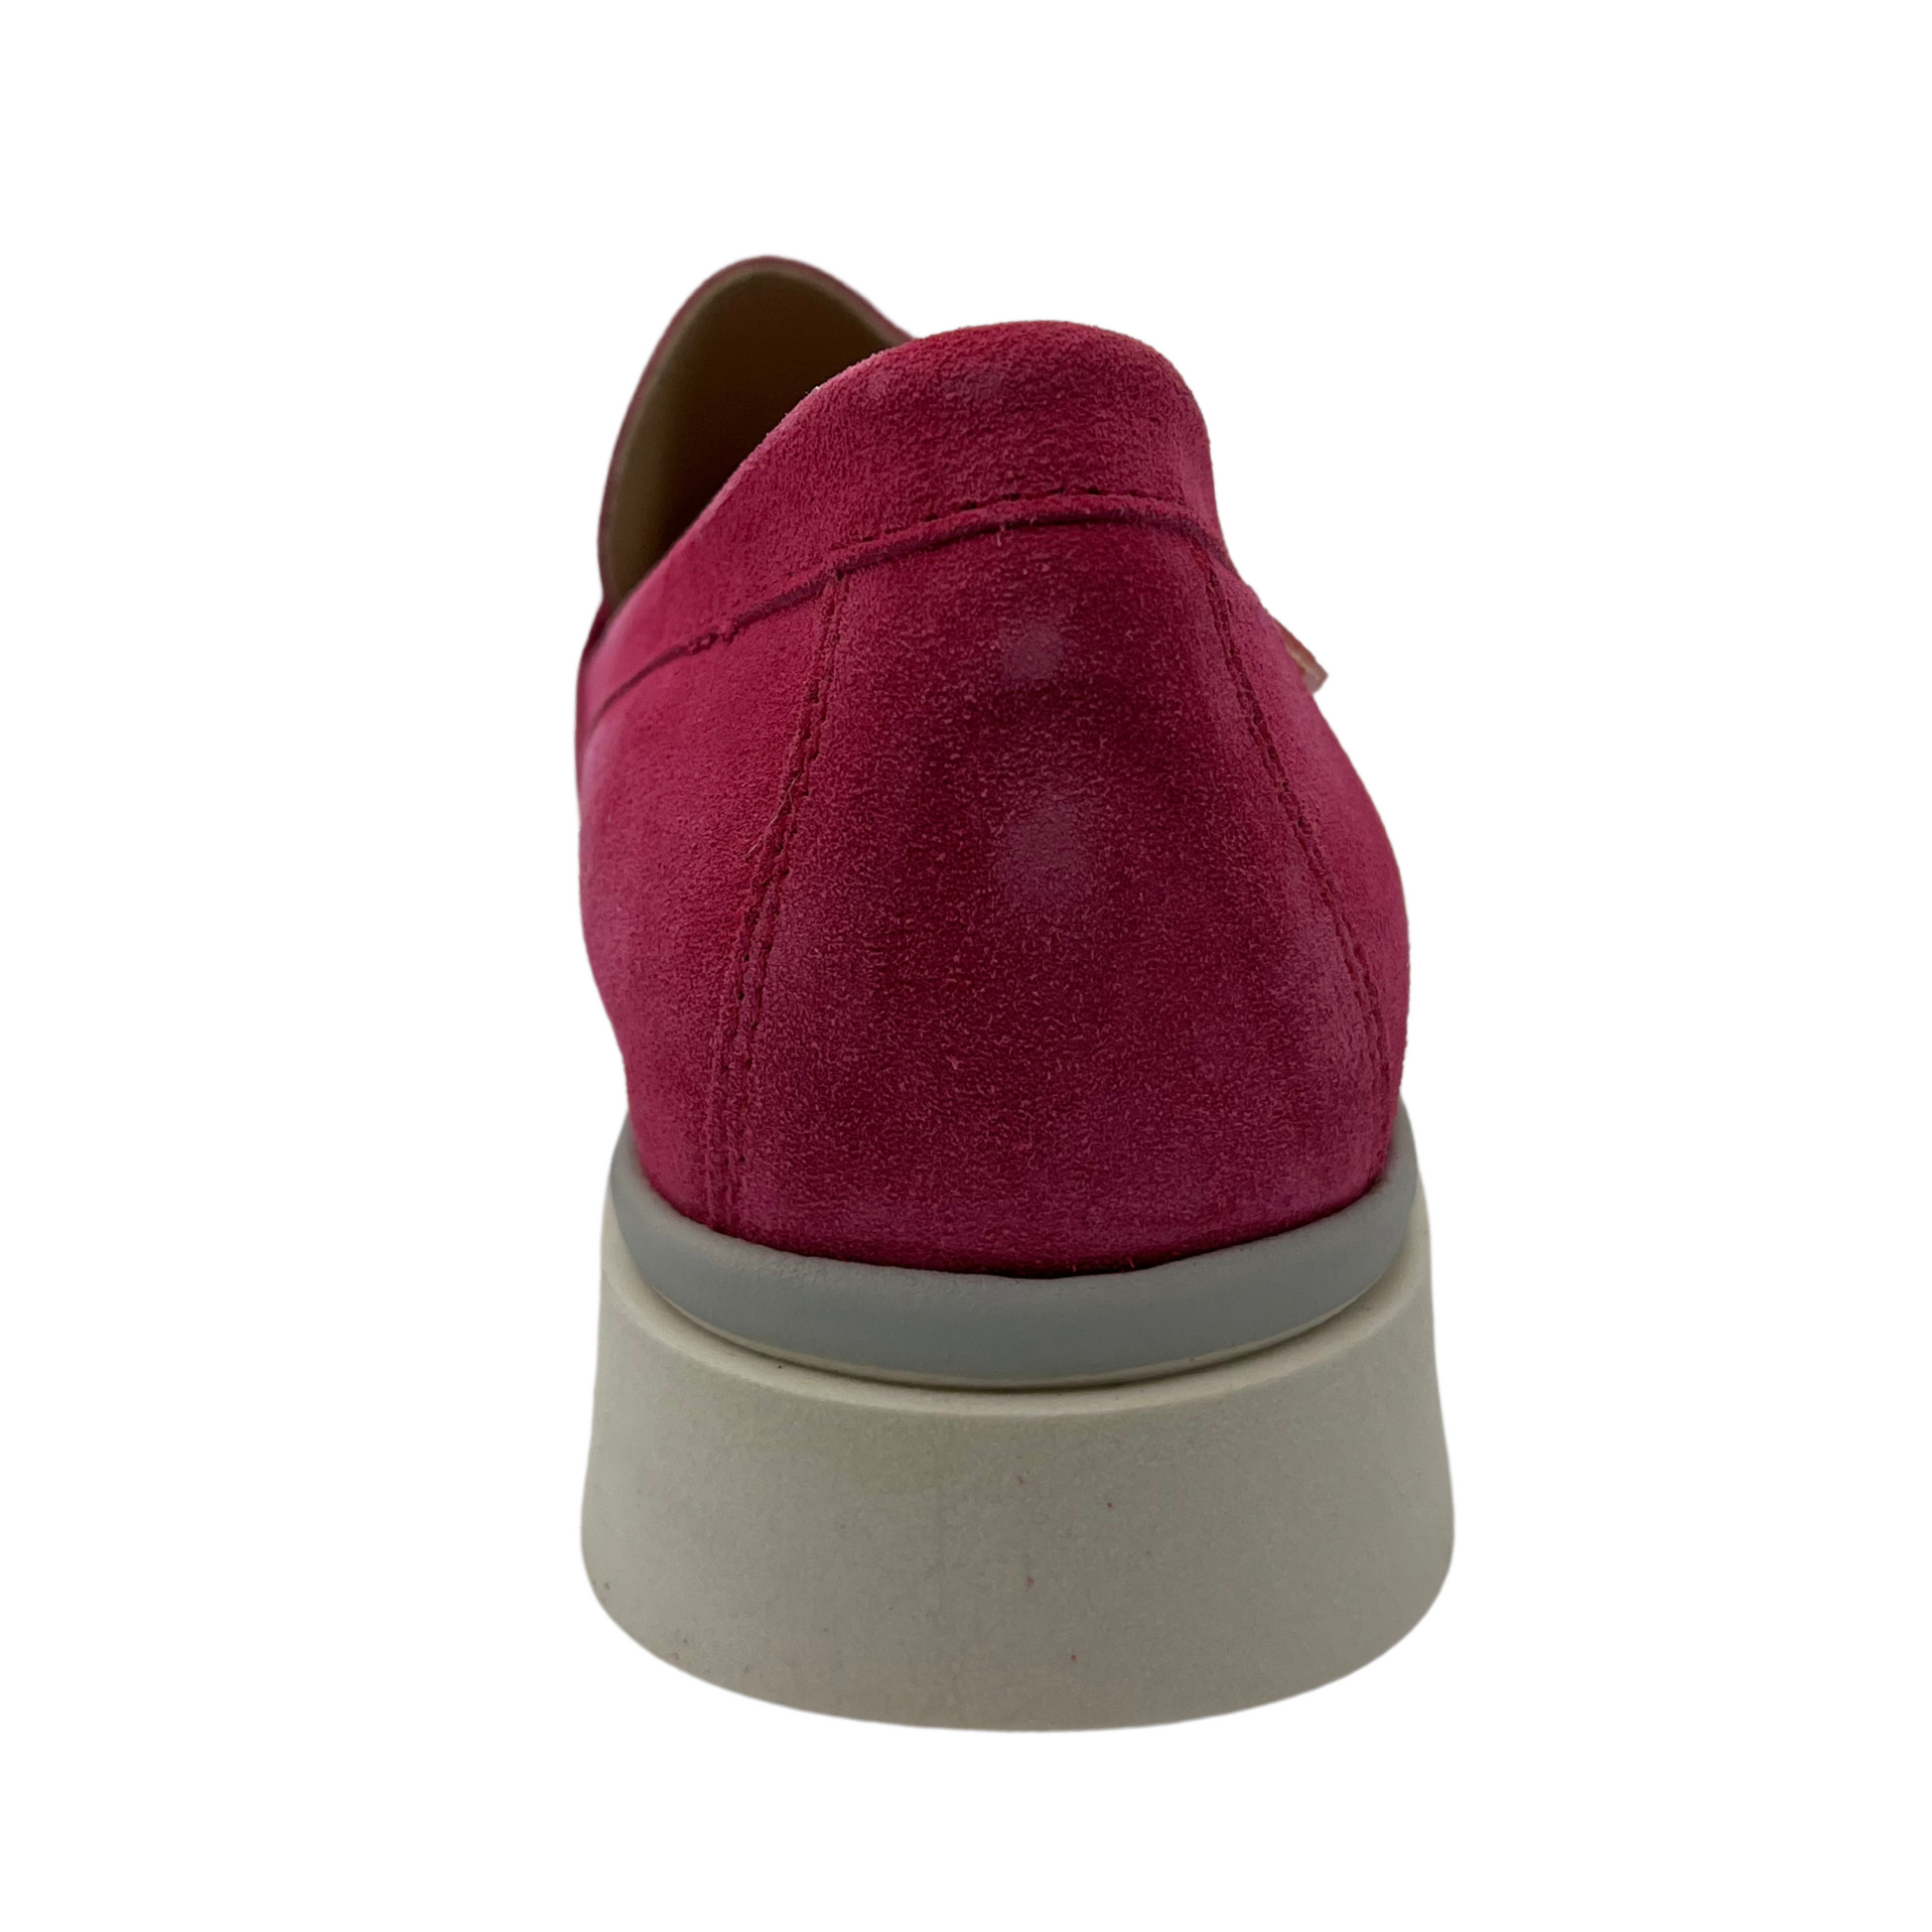 Back view of fuchsia suede loafer with white chunky sole